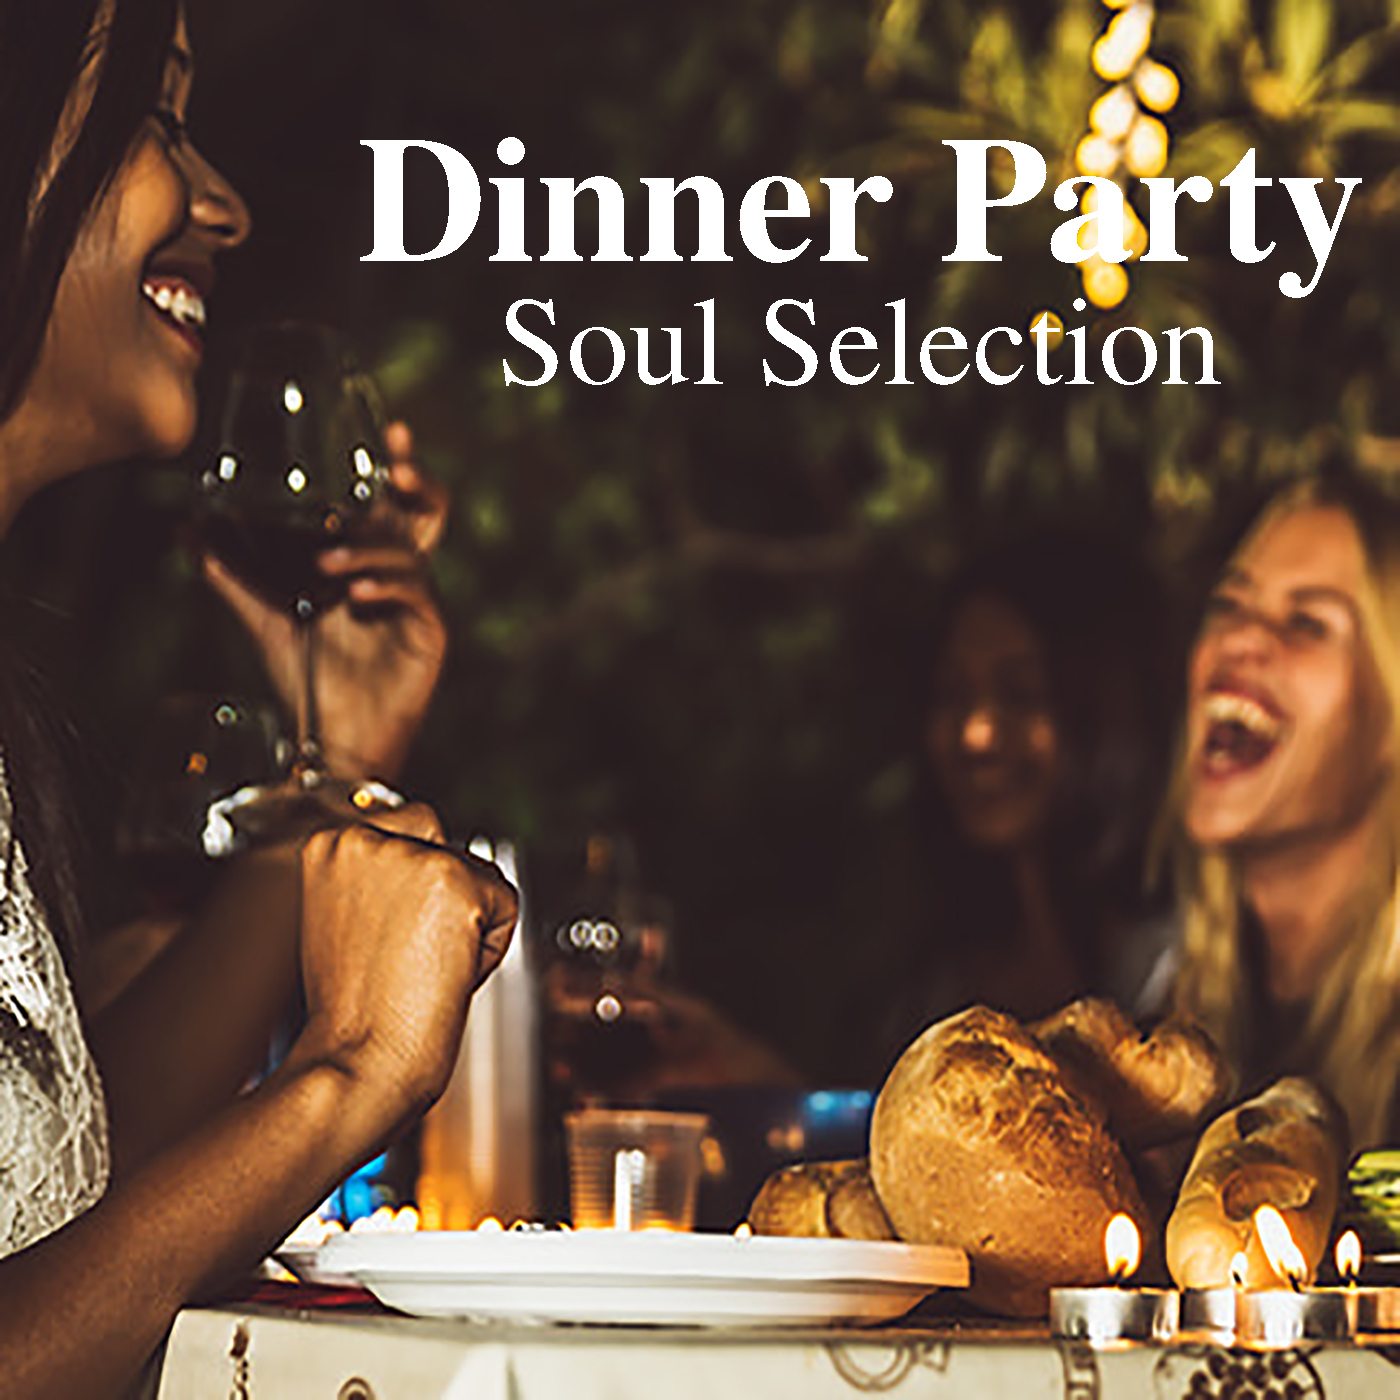 Dinner Party Soul Selection